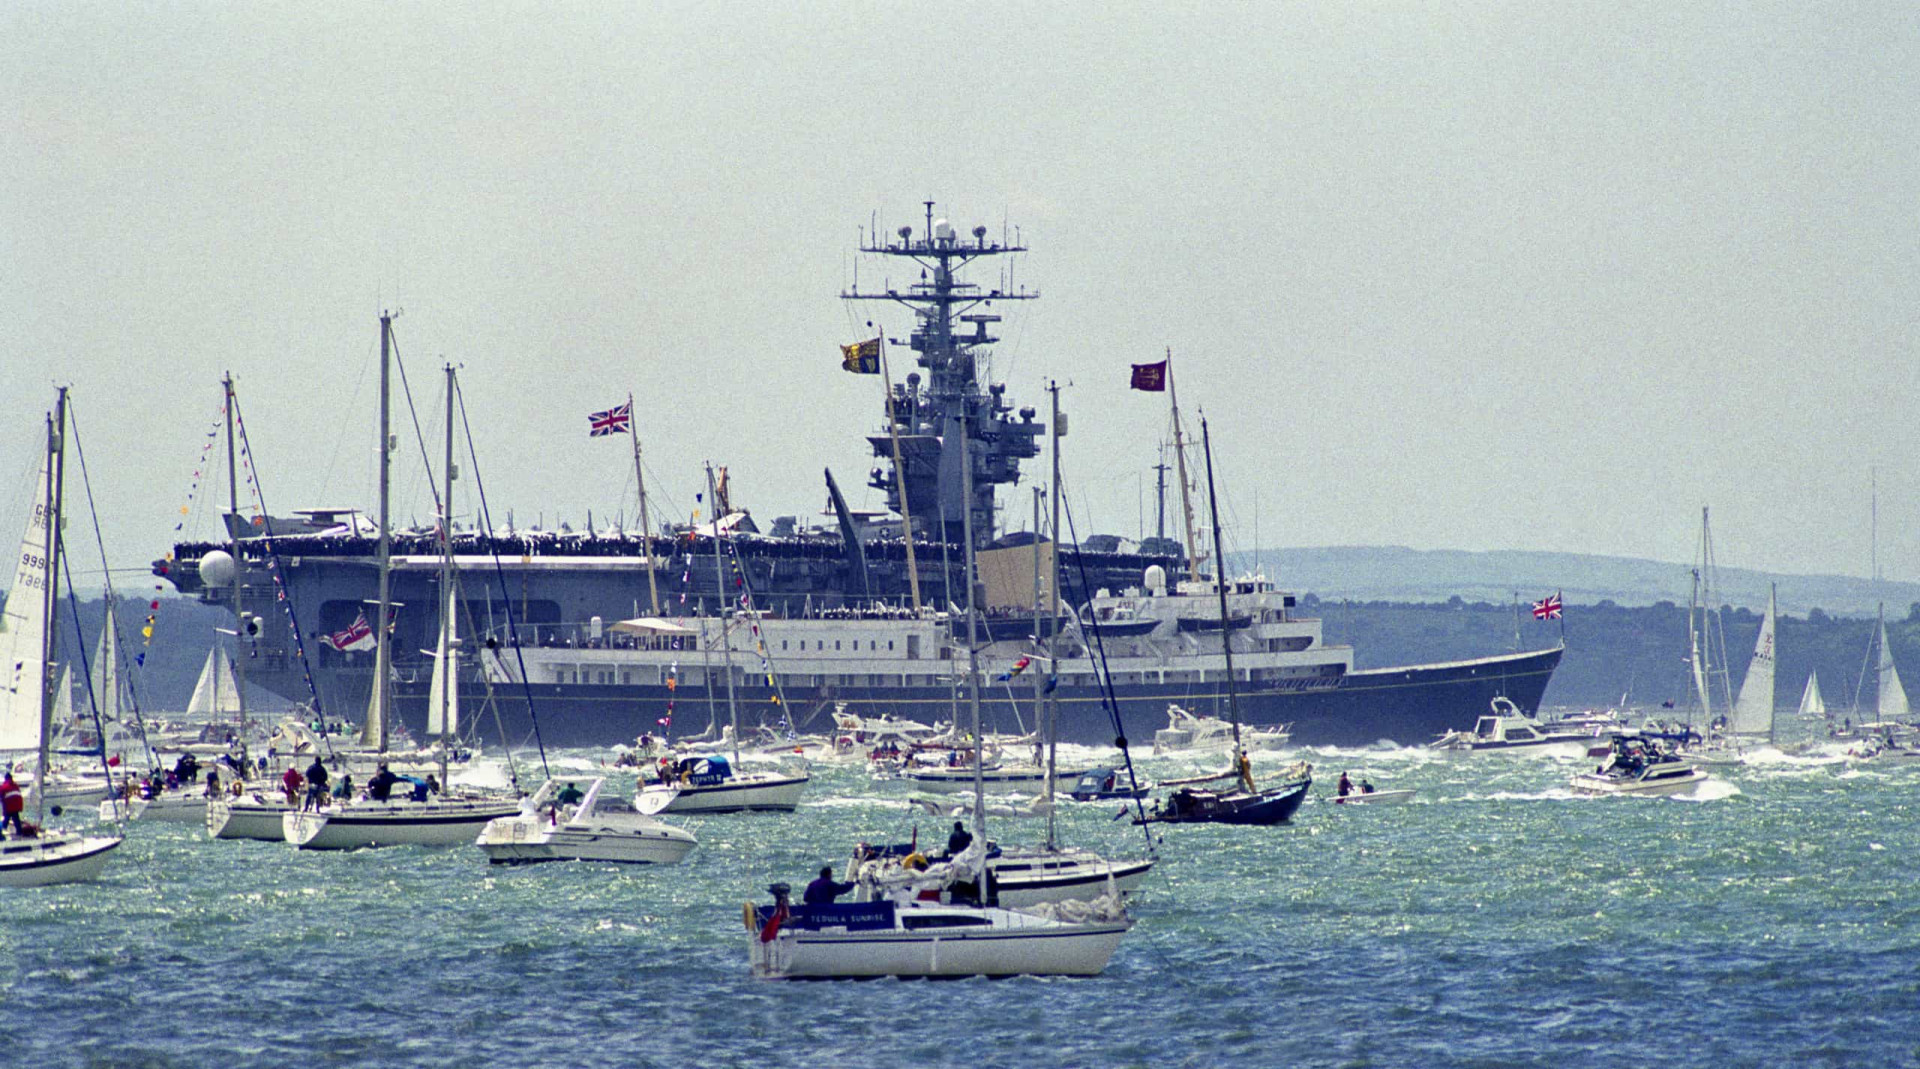 <p>June 6, 1994 marked the 50th anniversary of the D-Day landings in Normandy. To mark the historic occasion, <em>Britannia</em> and her royal passengers joined a colorful fleet review off Portsmouth and Gosport, in southern England.</p><p>You may also like:<a href="https://www.starsinsider.com/n/425531?utm_source=msn.com&utm_medium=display&utm_campaign=referral_description&utm_content=474709v3en-sg"> Take the coronavirus quiz: Are you overreacting or being safe?</a></p>